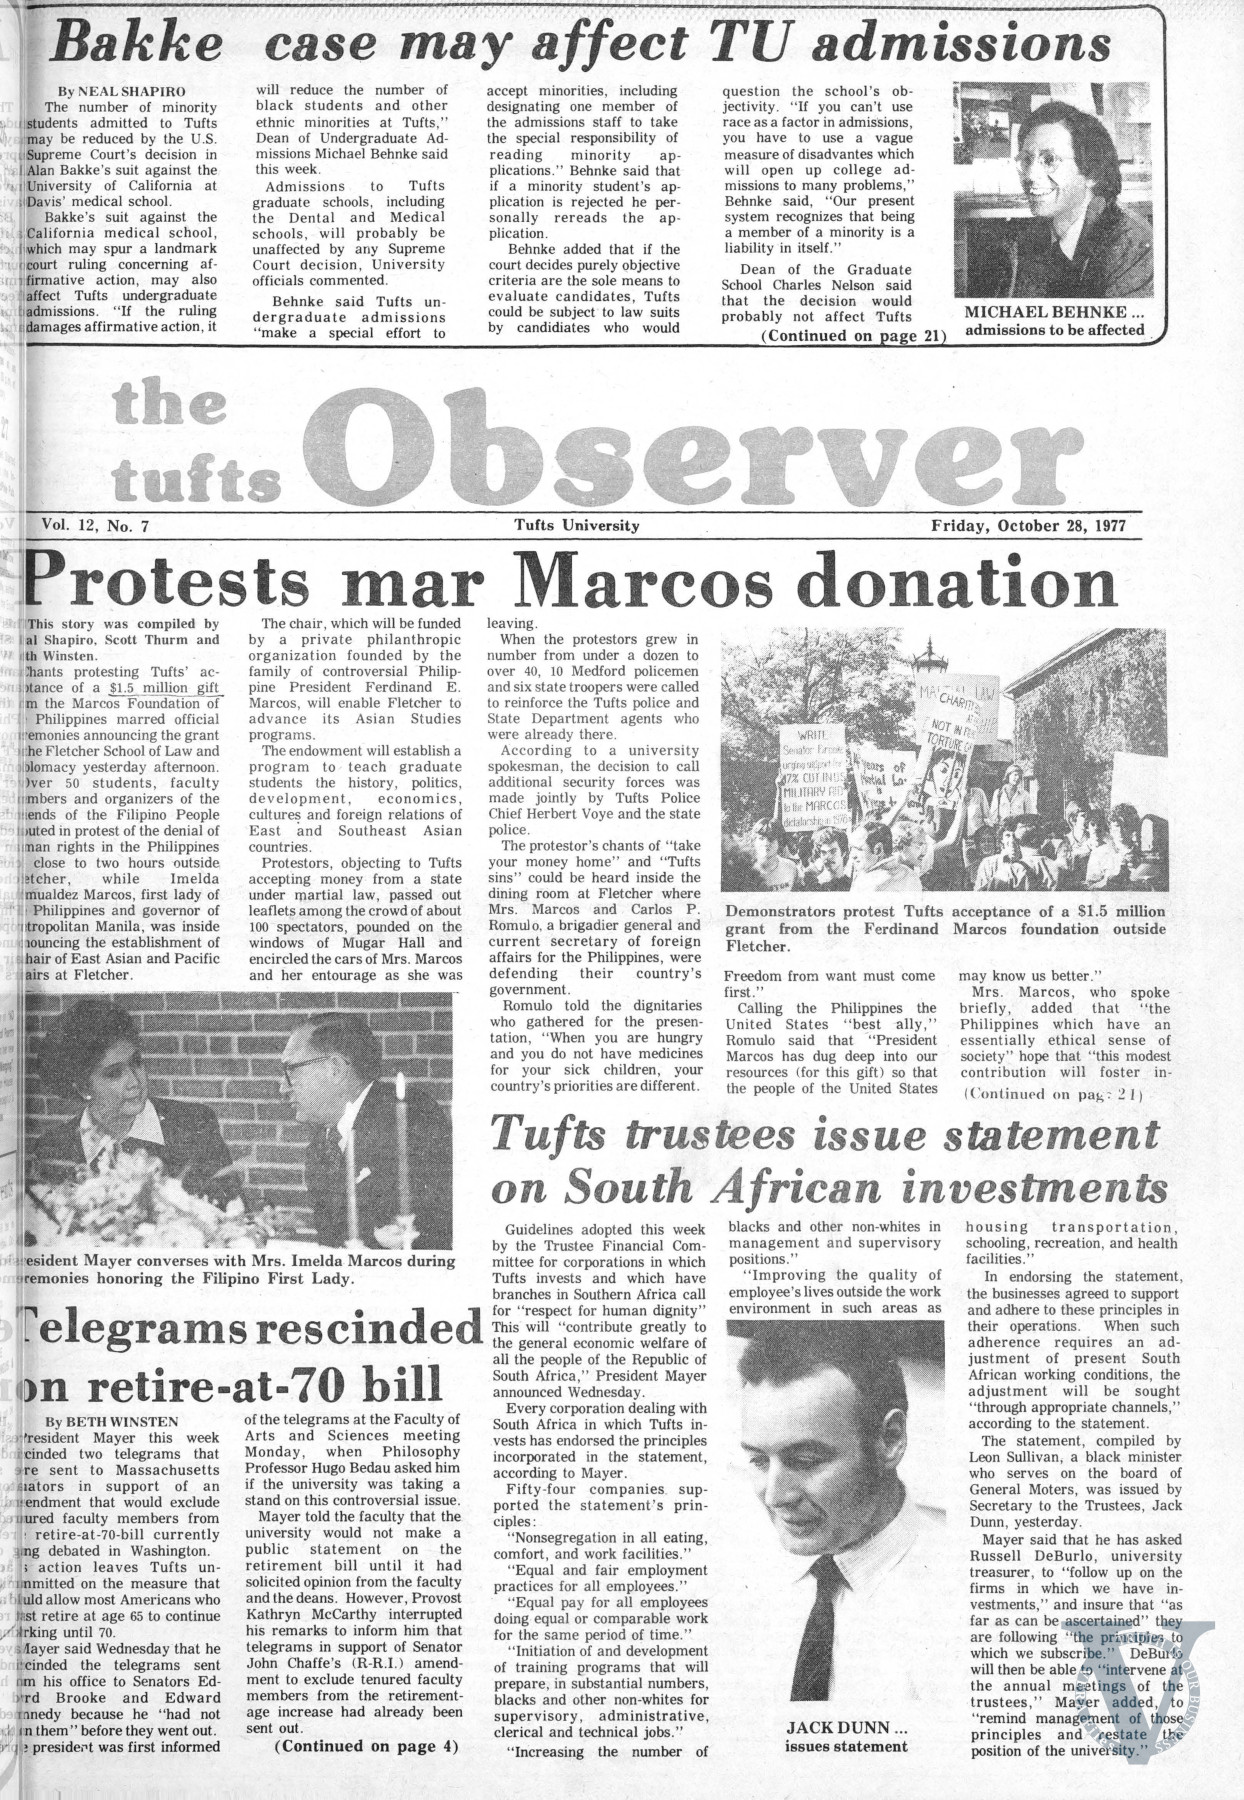 Figure 1. Front page of the Tufts Observer, October 28, 1977